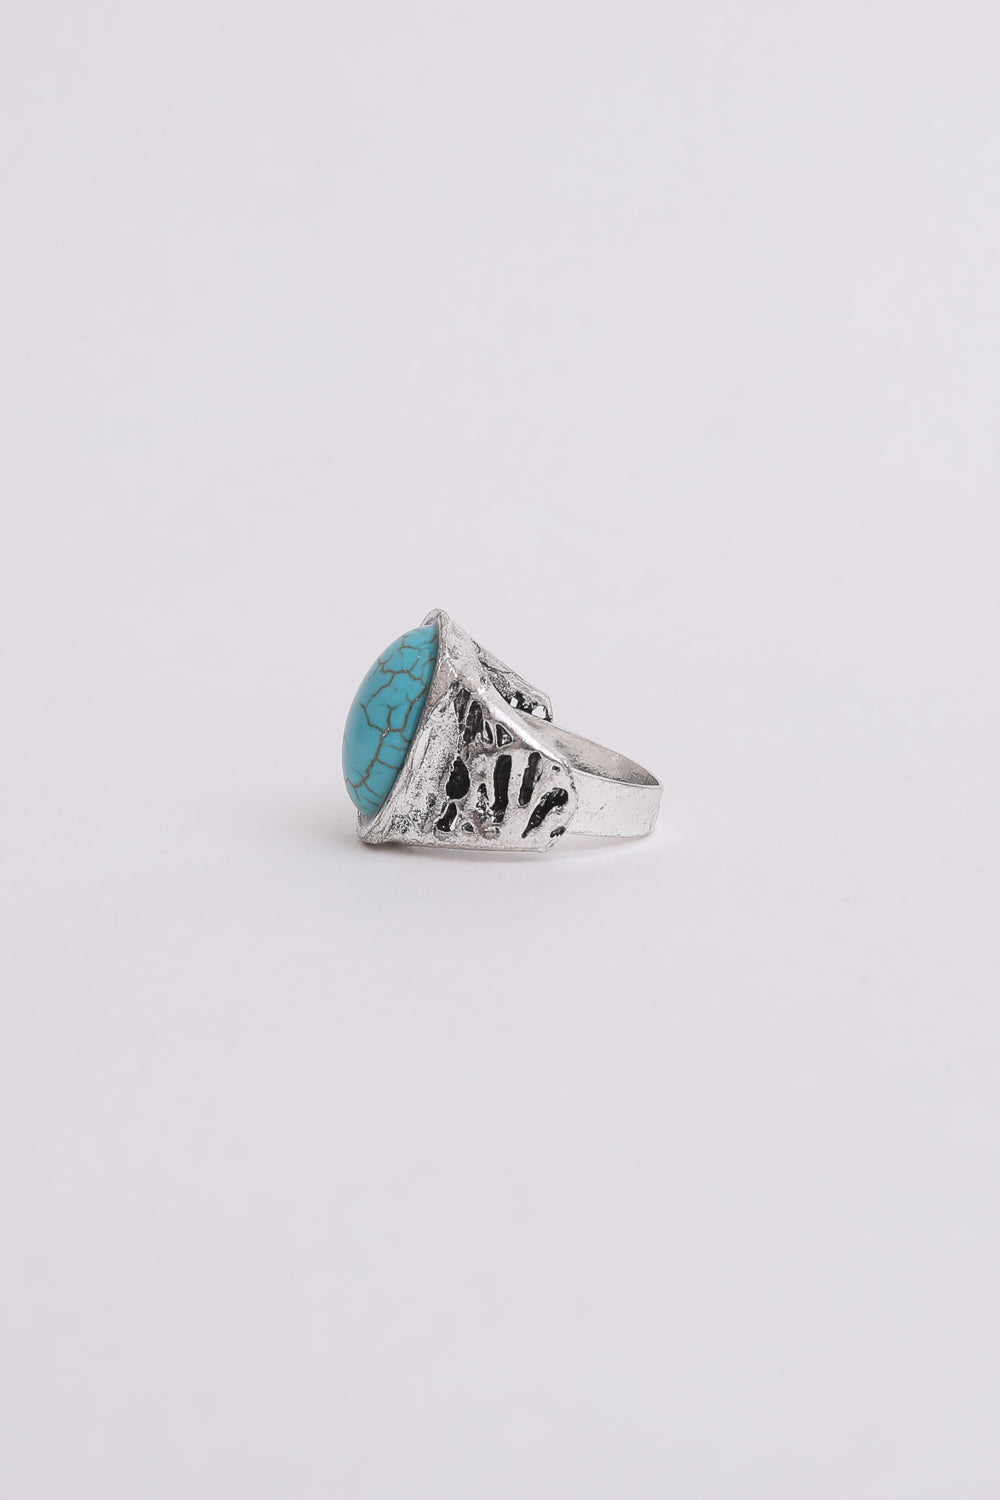 Bohemian Oval Cut Turquoise Ring Jewelry